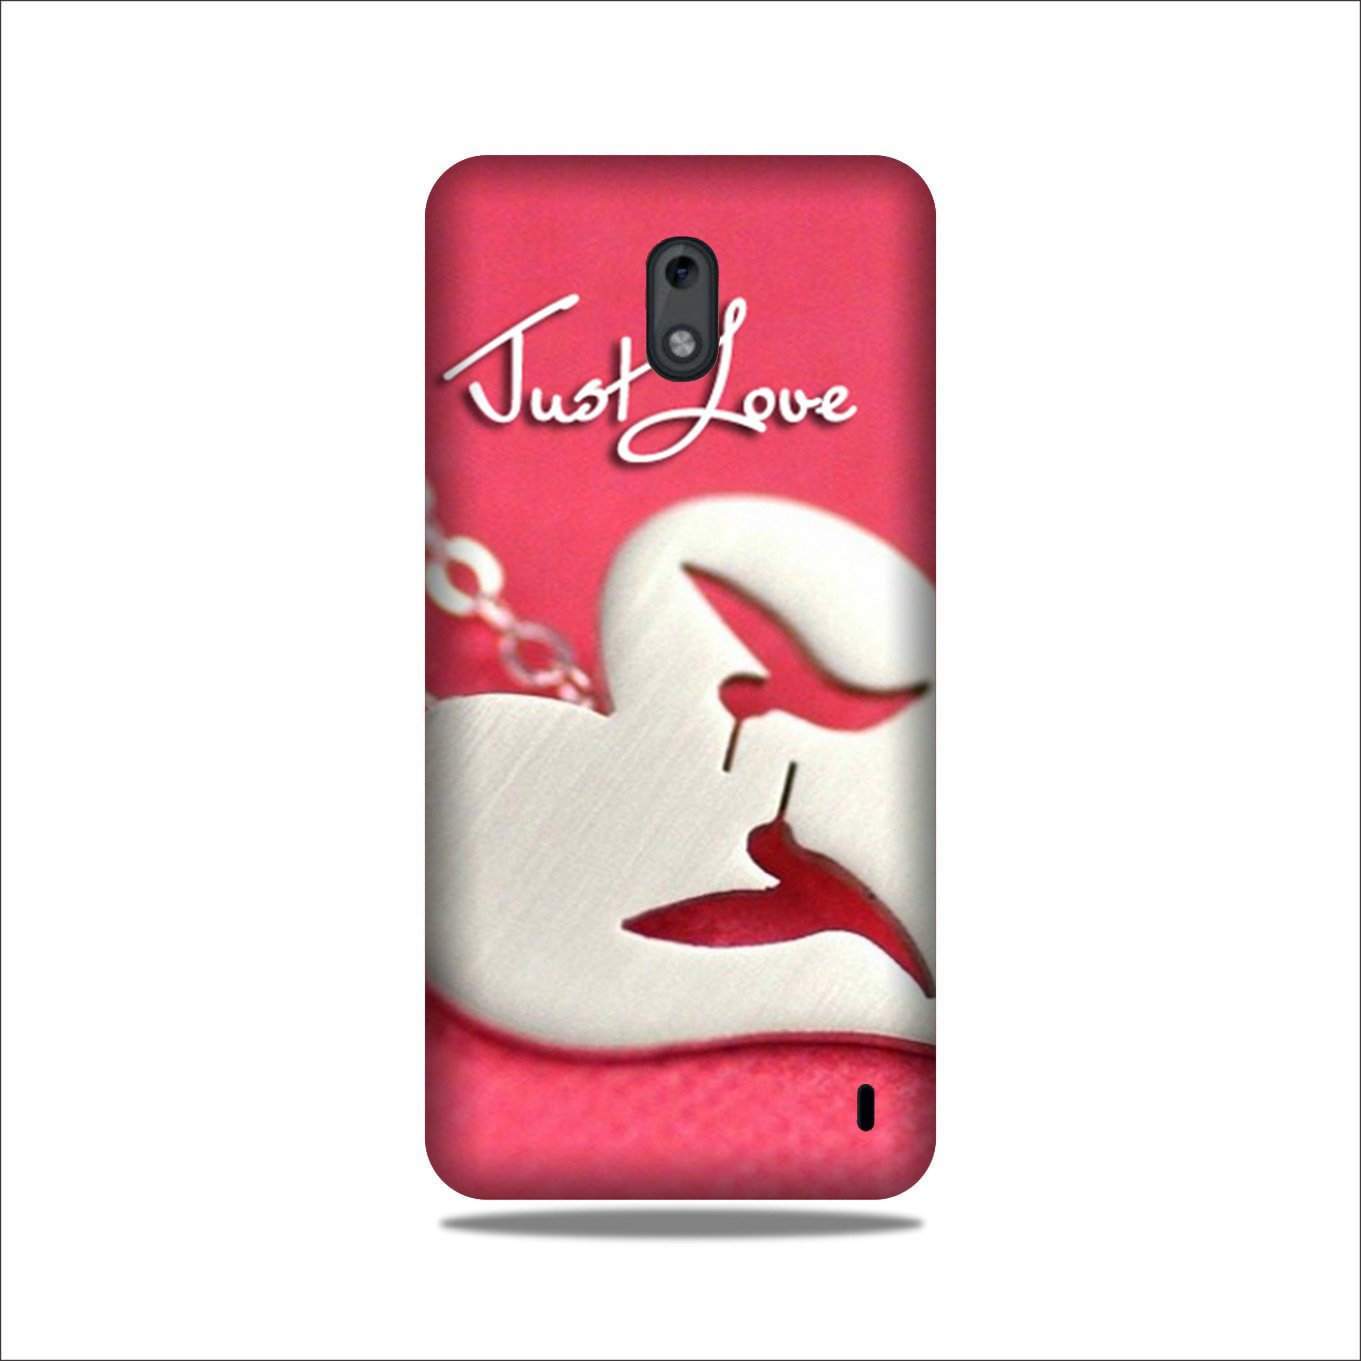 Just love Case for Nokia 3